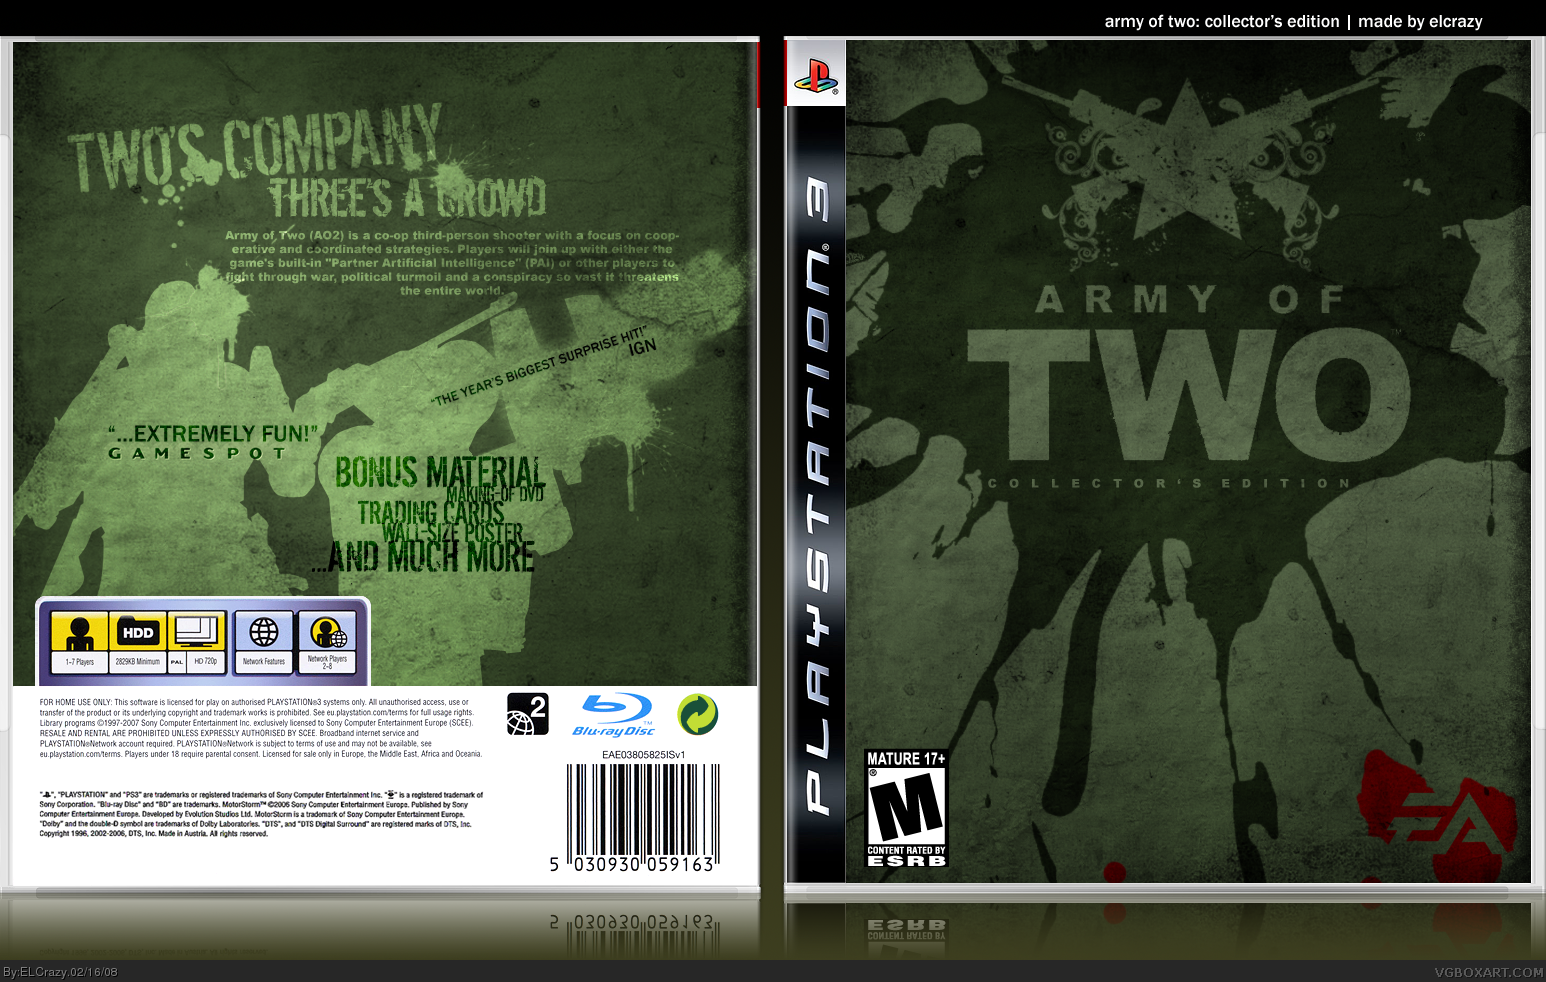 Army of Two: Collector's Edition box cover